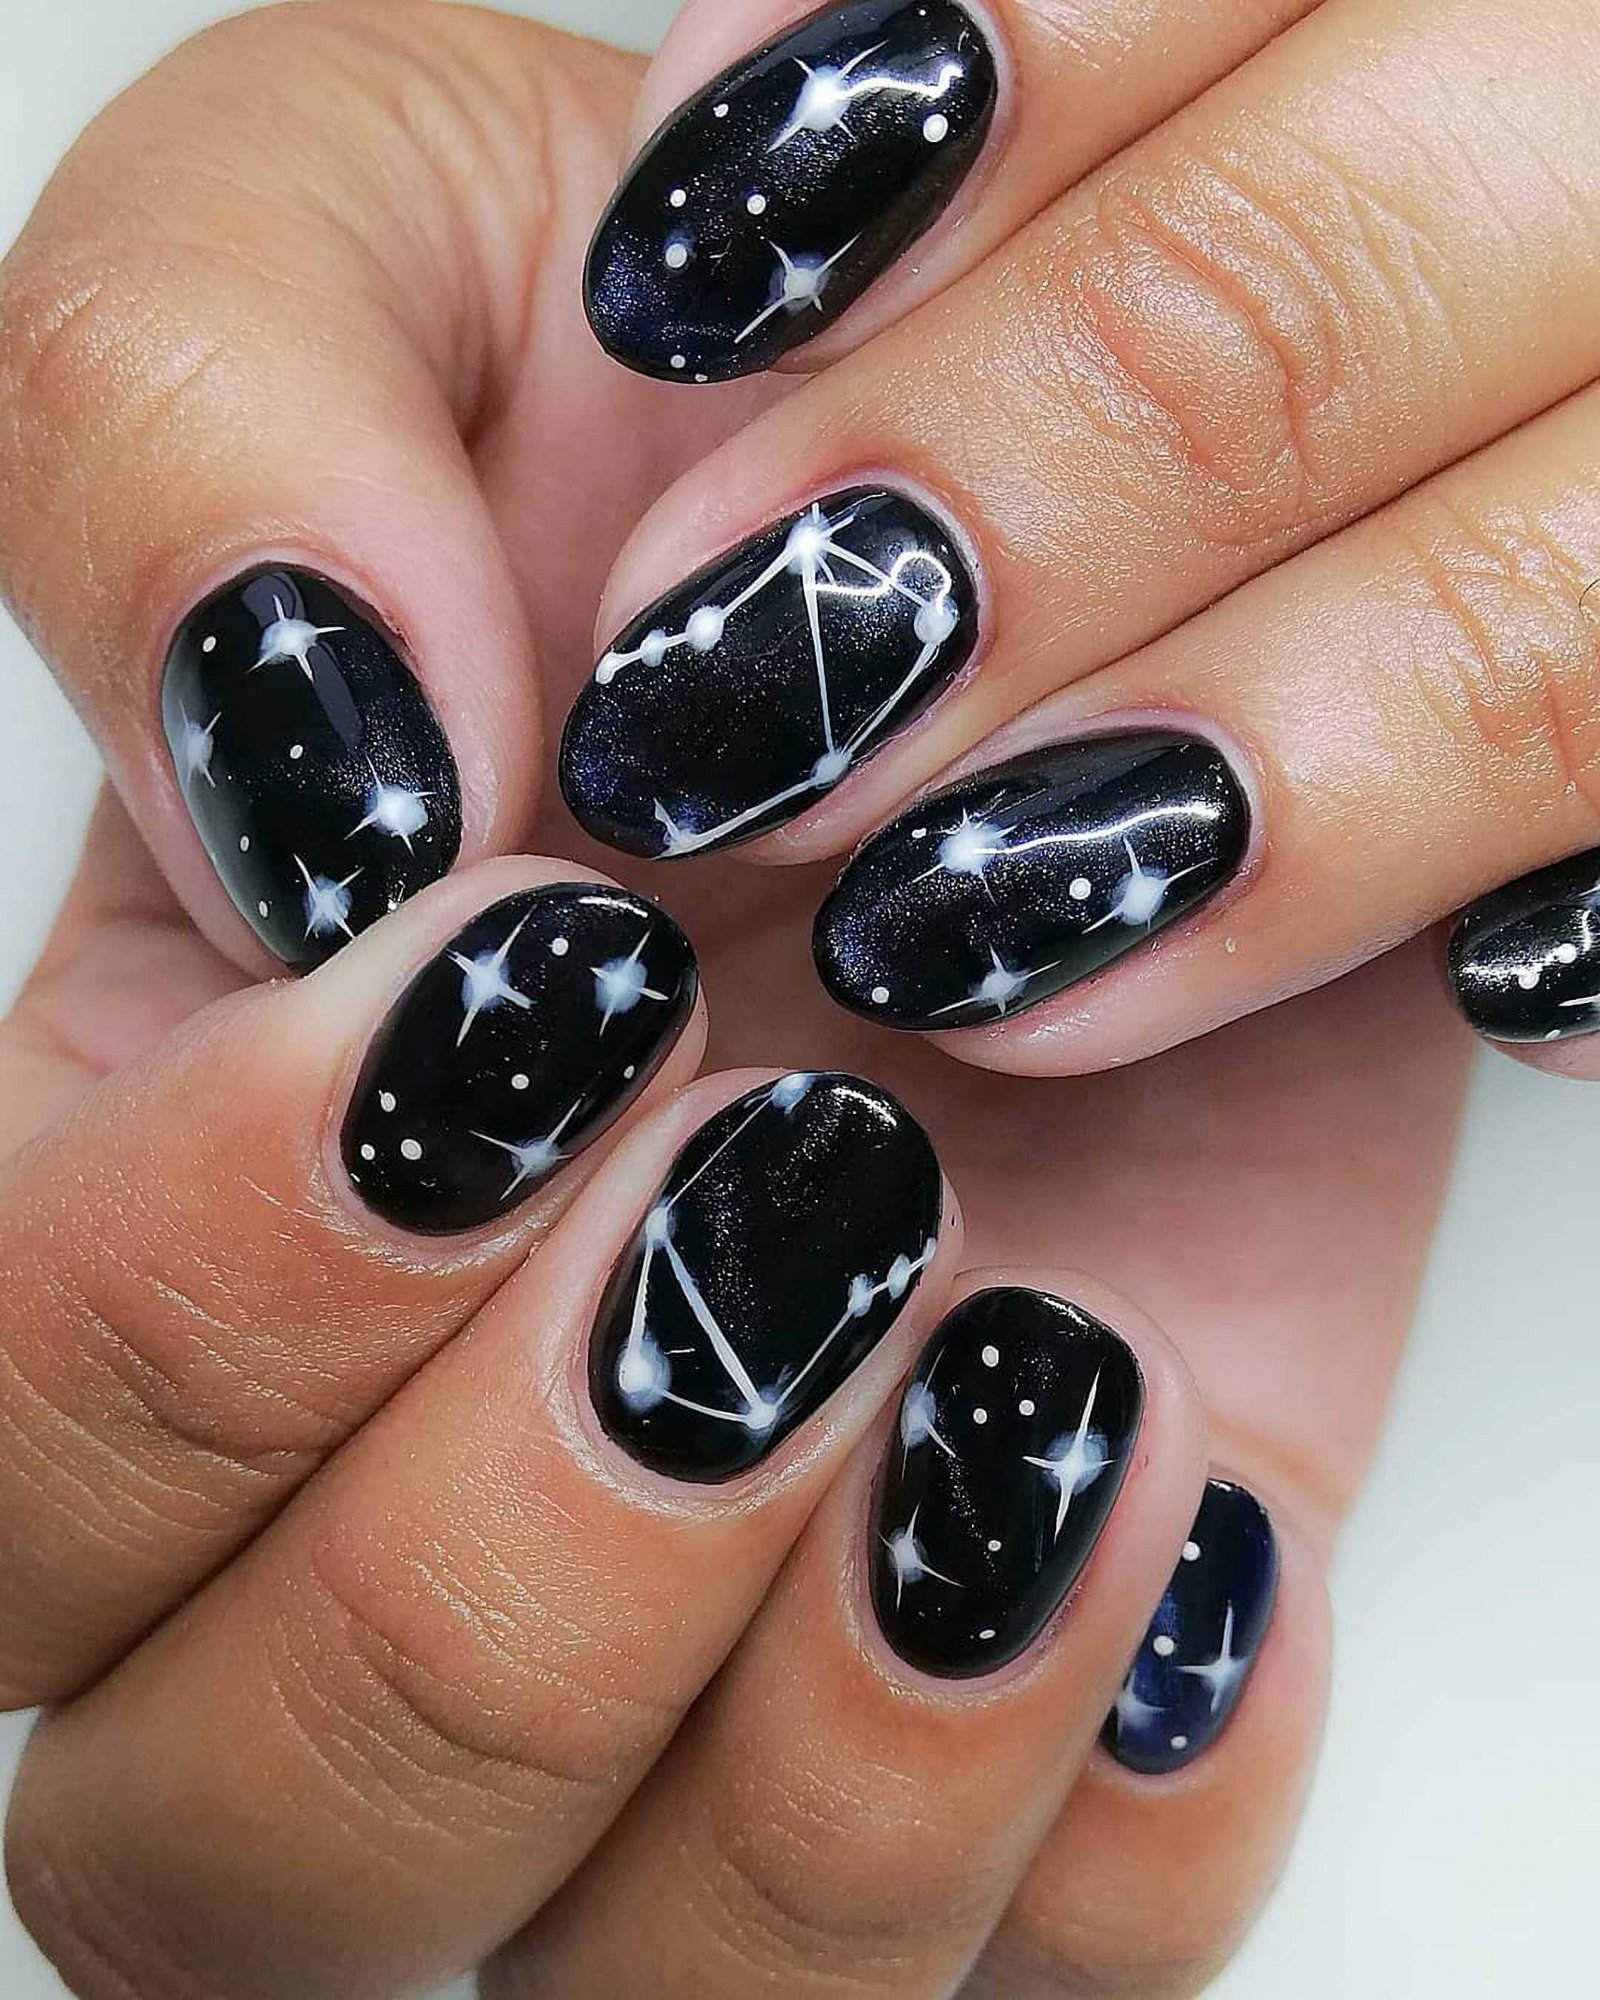 short nails with night sky pattern